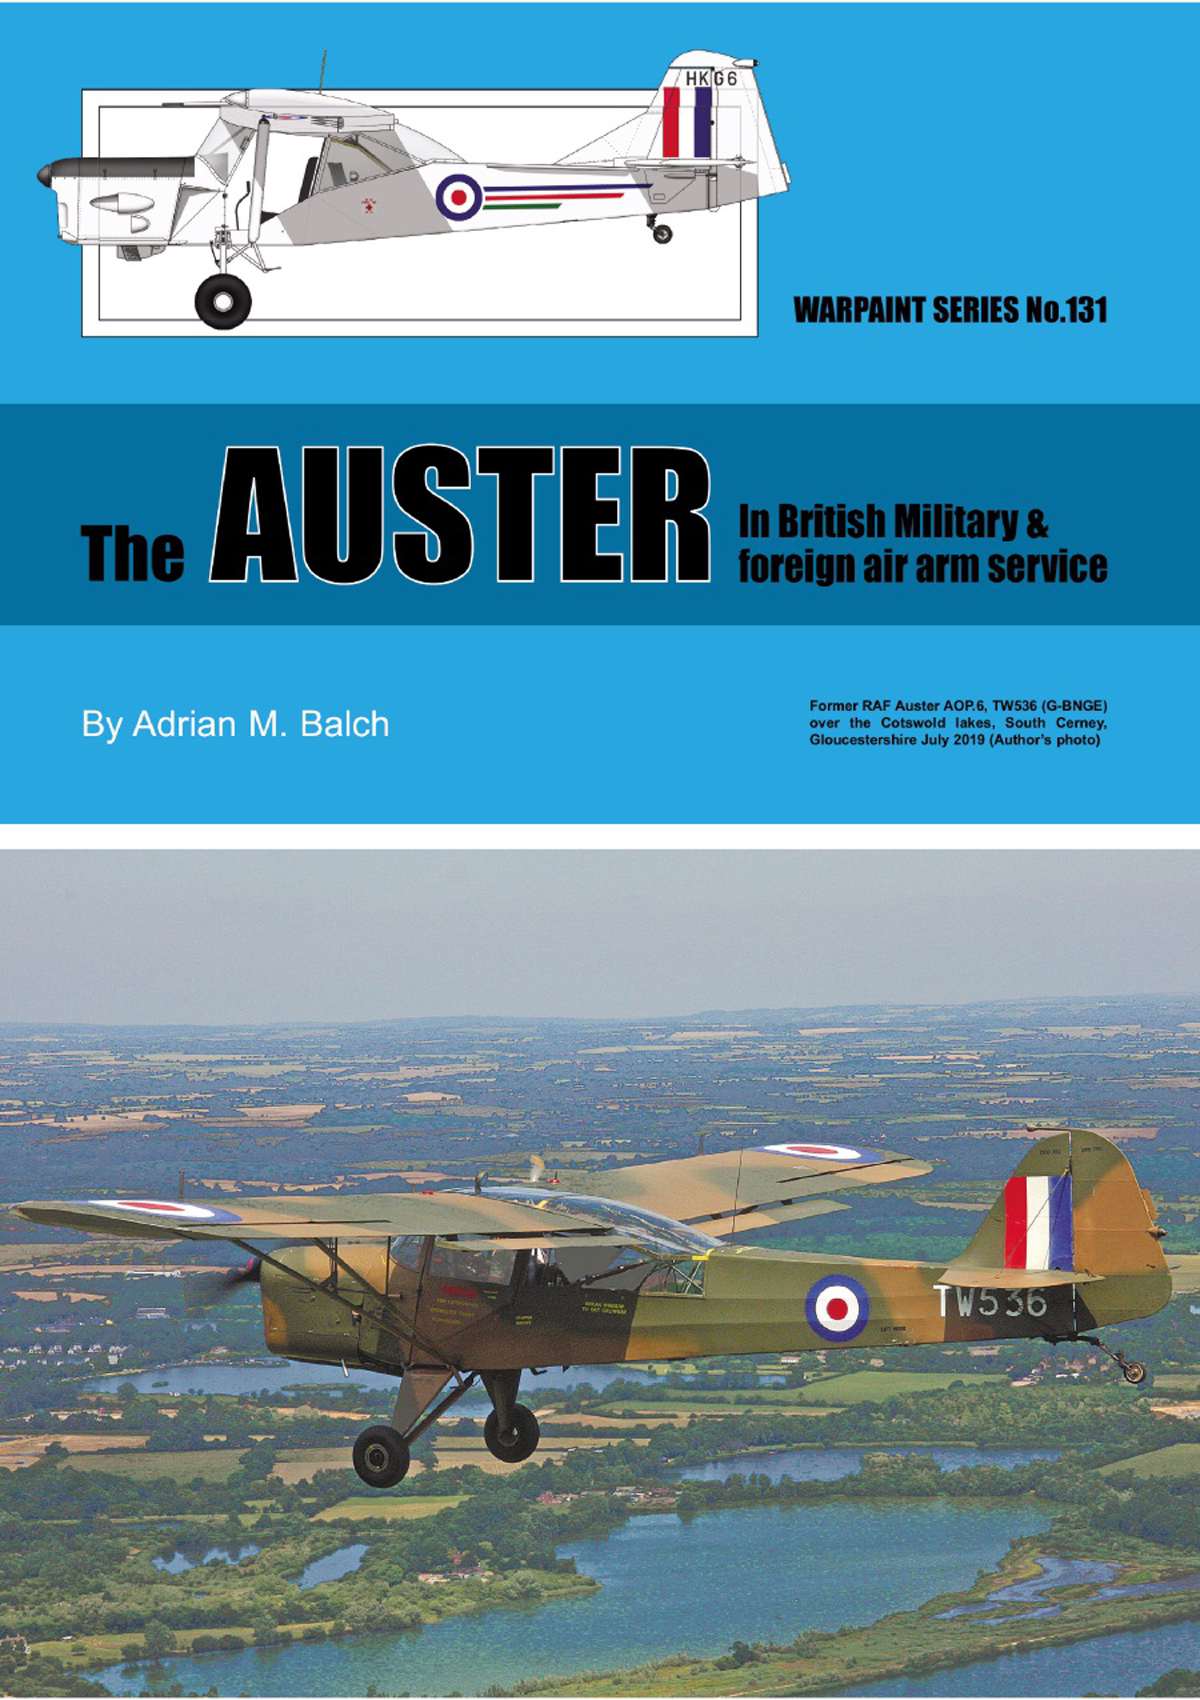 N131 - The Auster